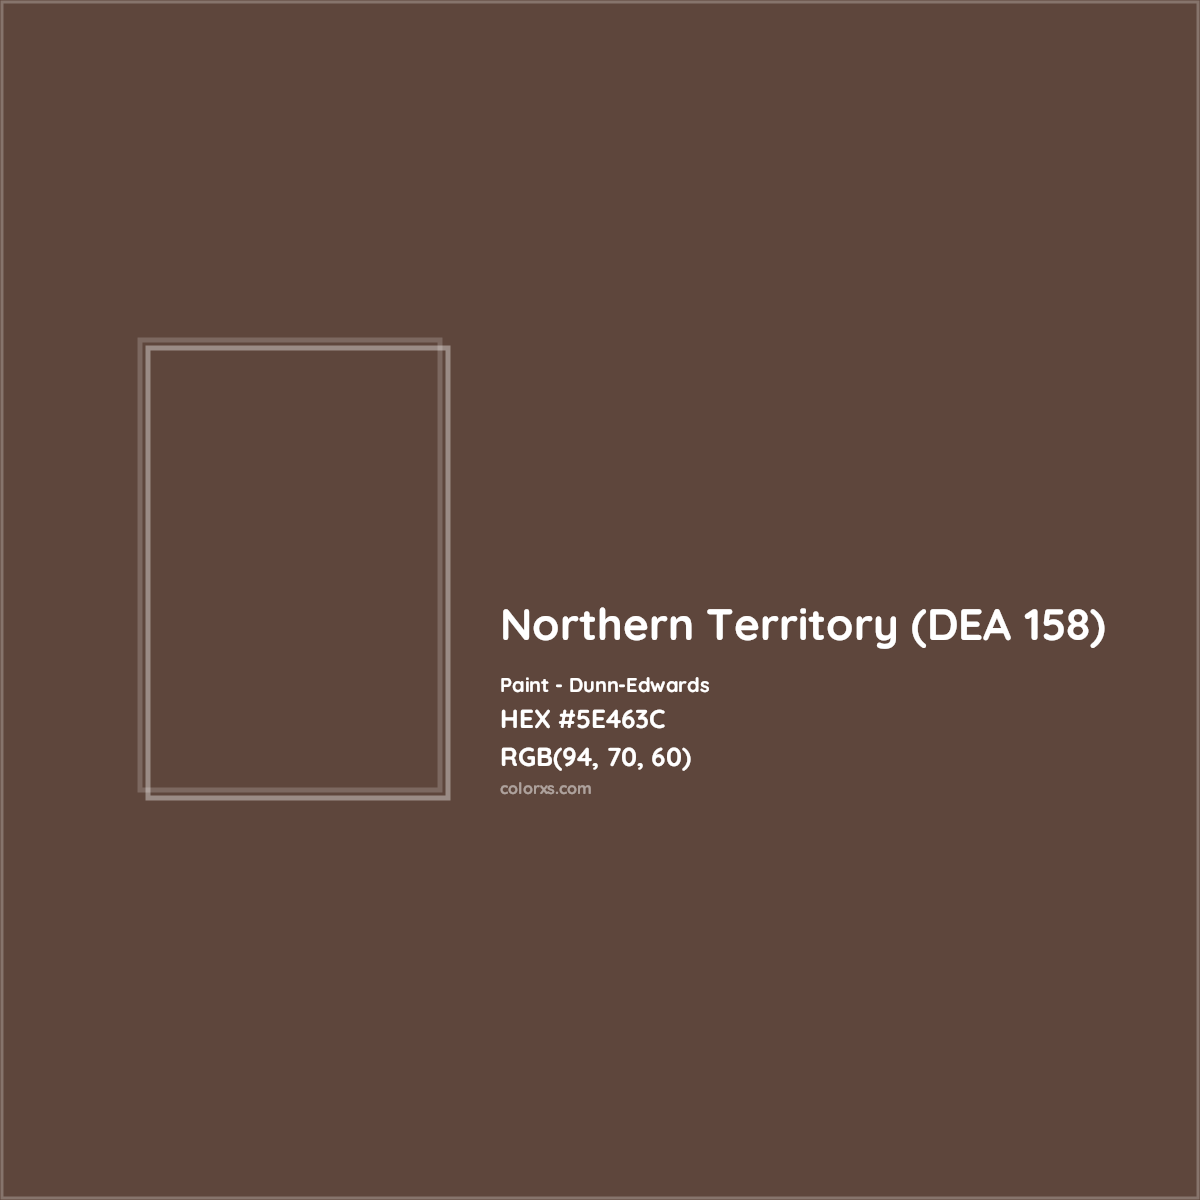 HEX #5E463C Northern Territory (DEA 158) Paint Dunn-Edwards - Color Code